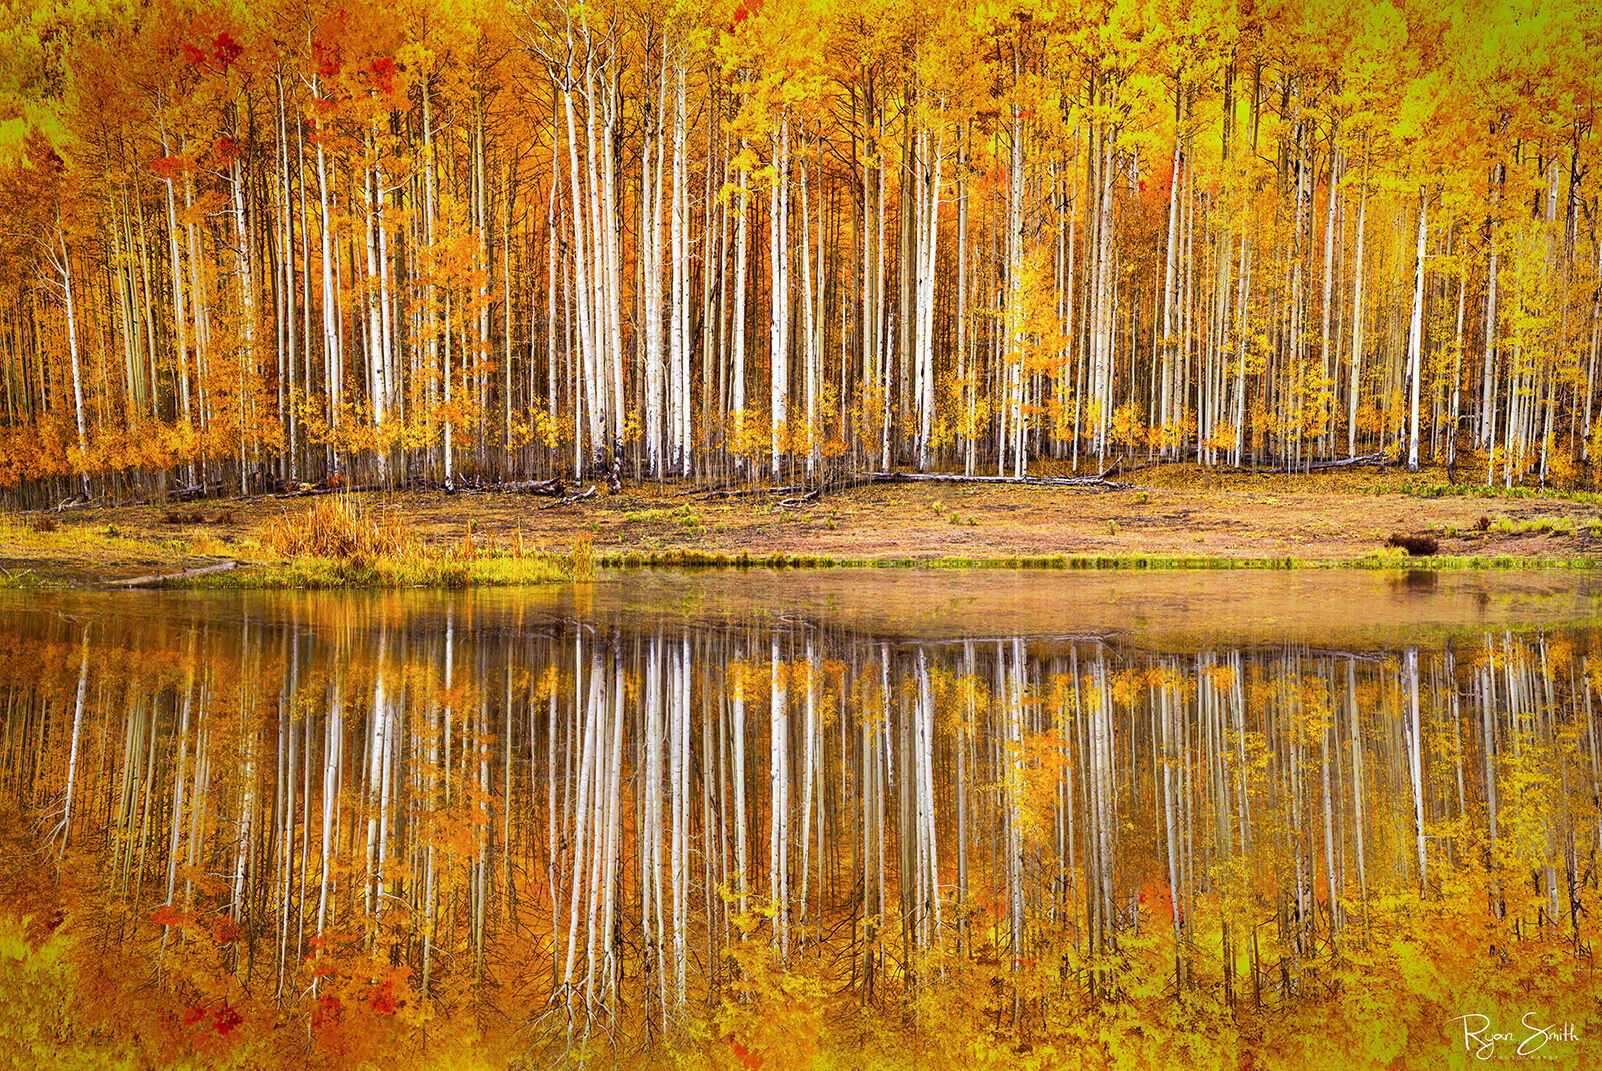 A grove of aspen trees with tall, thin trunks and bright yellow leaves is perfectly reflected on a still pond.